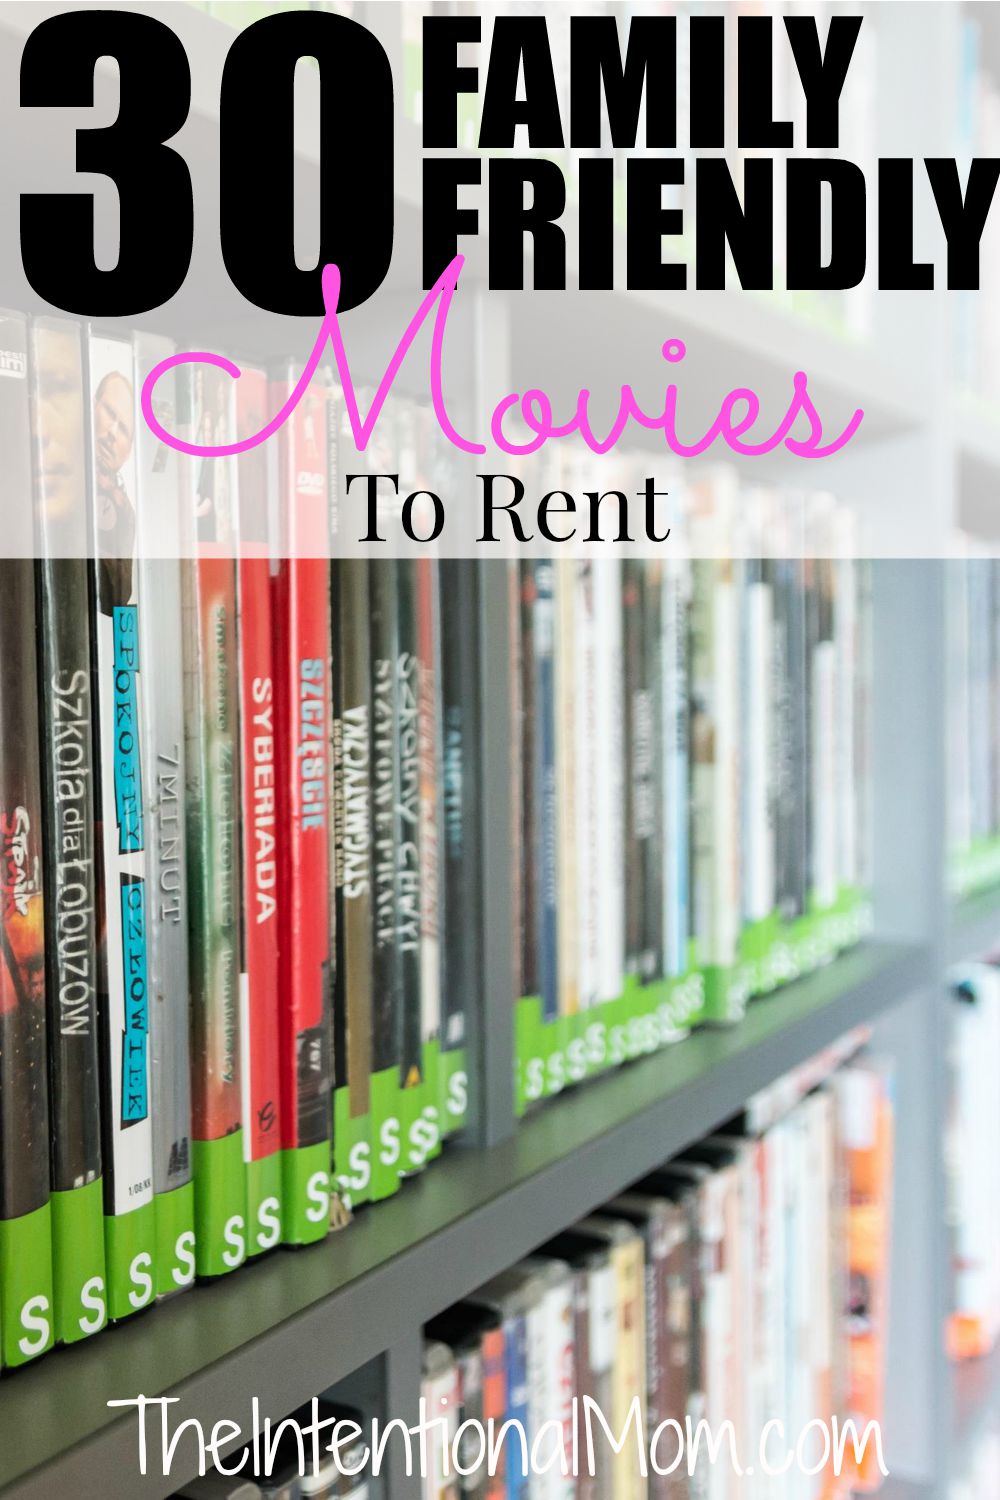 30 Family Friendly Movies to Rent